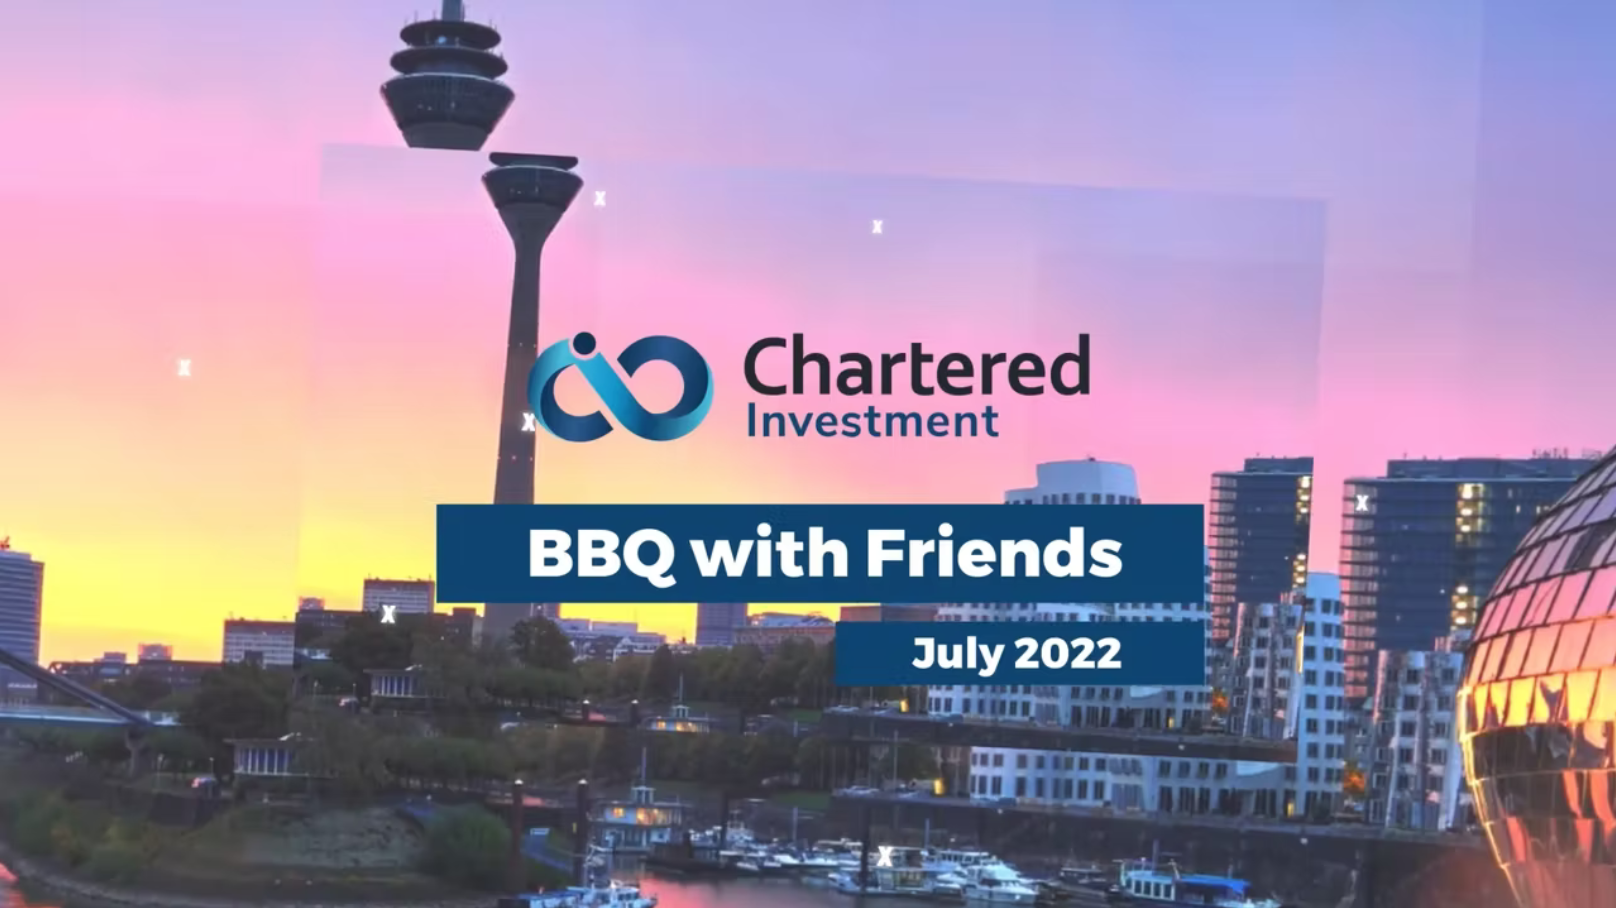 Video Trailer des Chartered Investment BBQ 2022